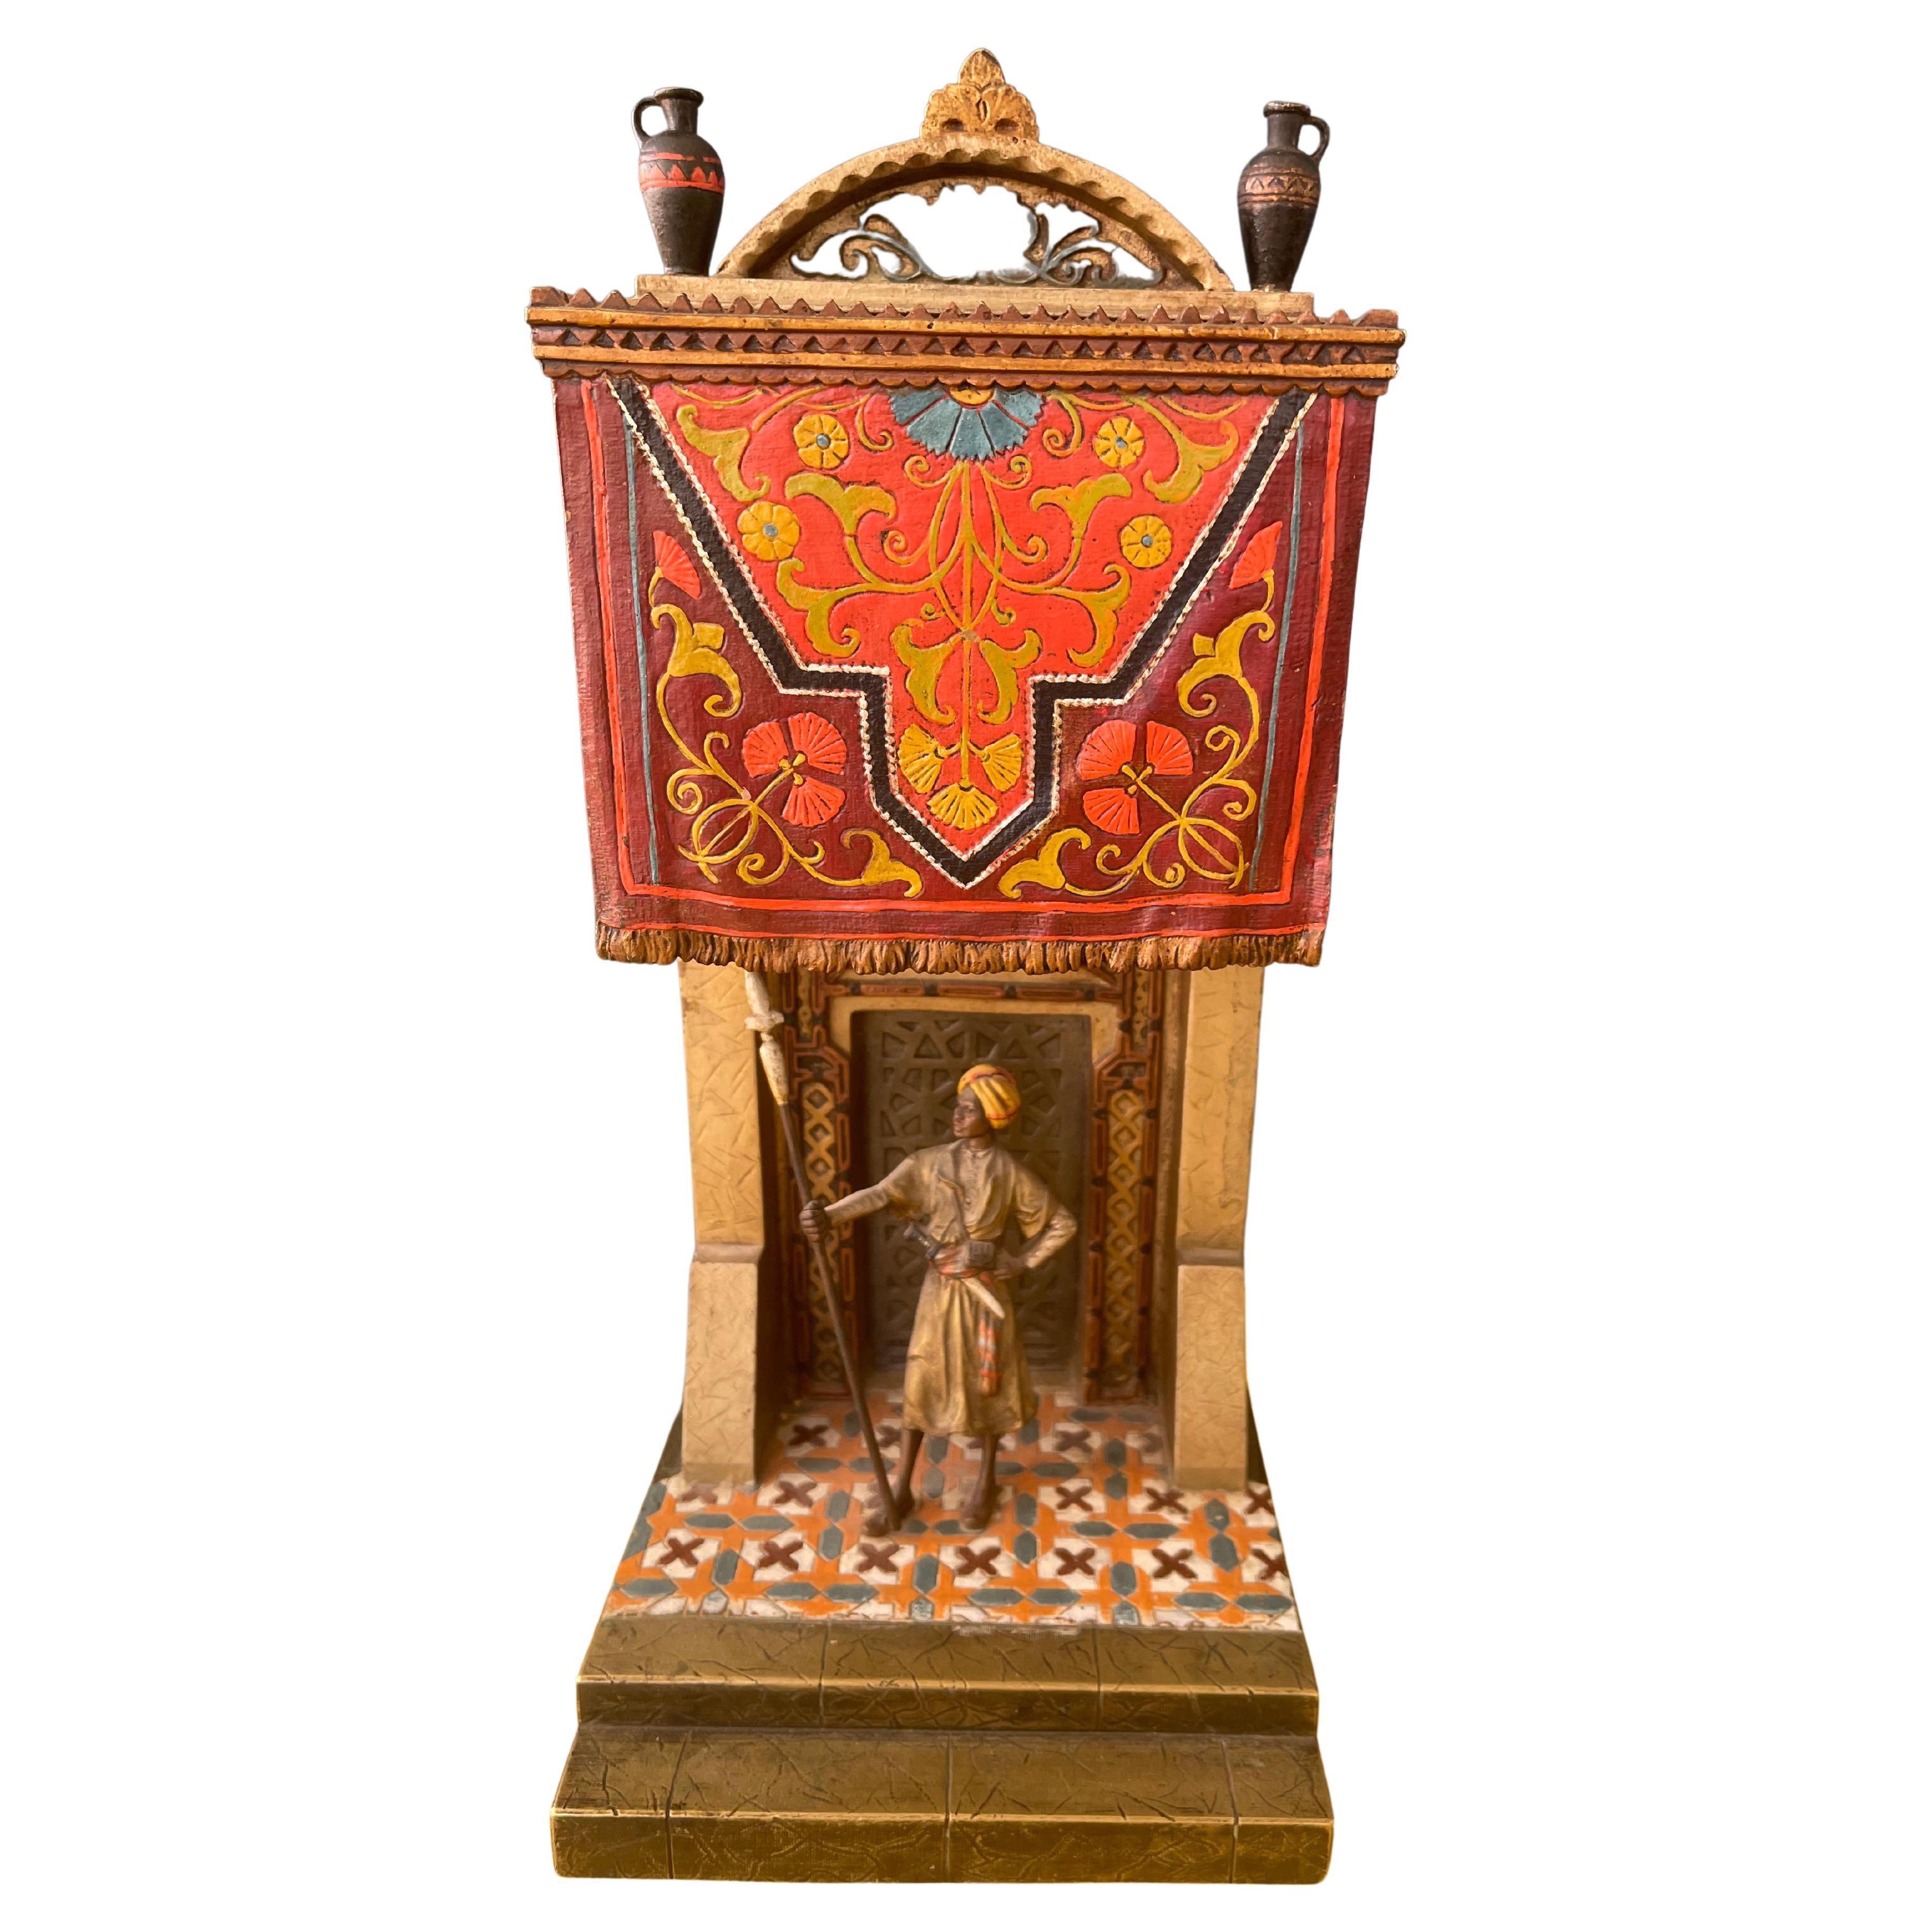 Orientalist Cold Painted Vienna Bronze Lamp, Guard & Palace, Signed "Chotka" For Sale